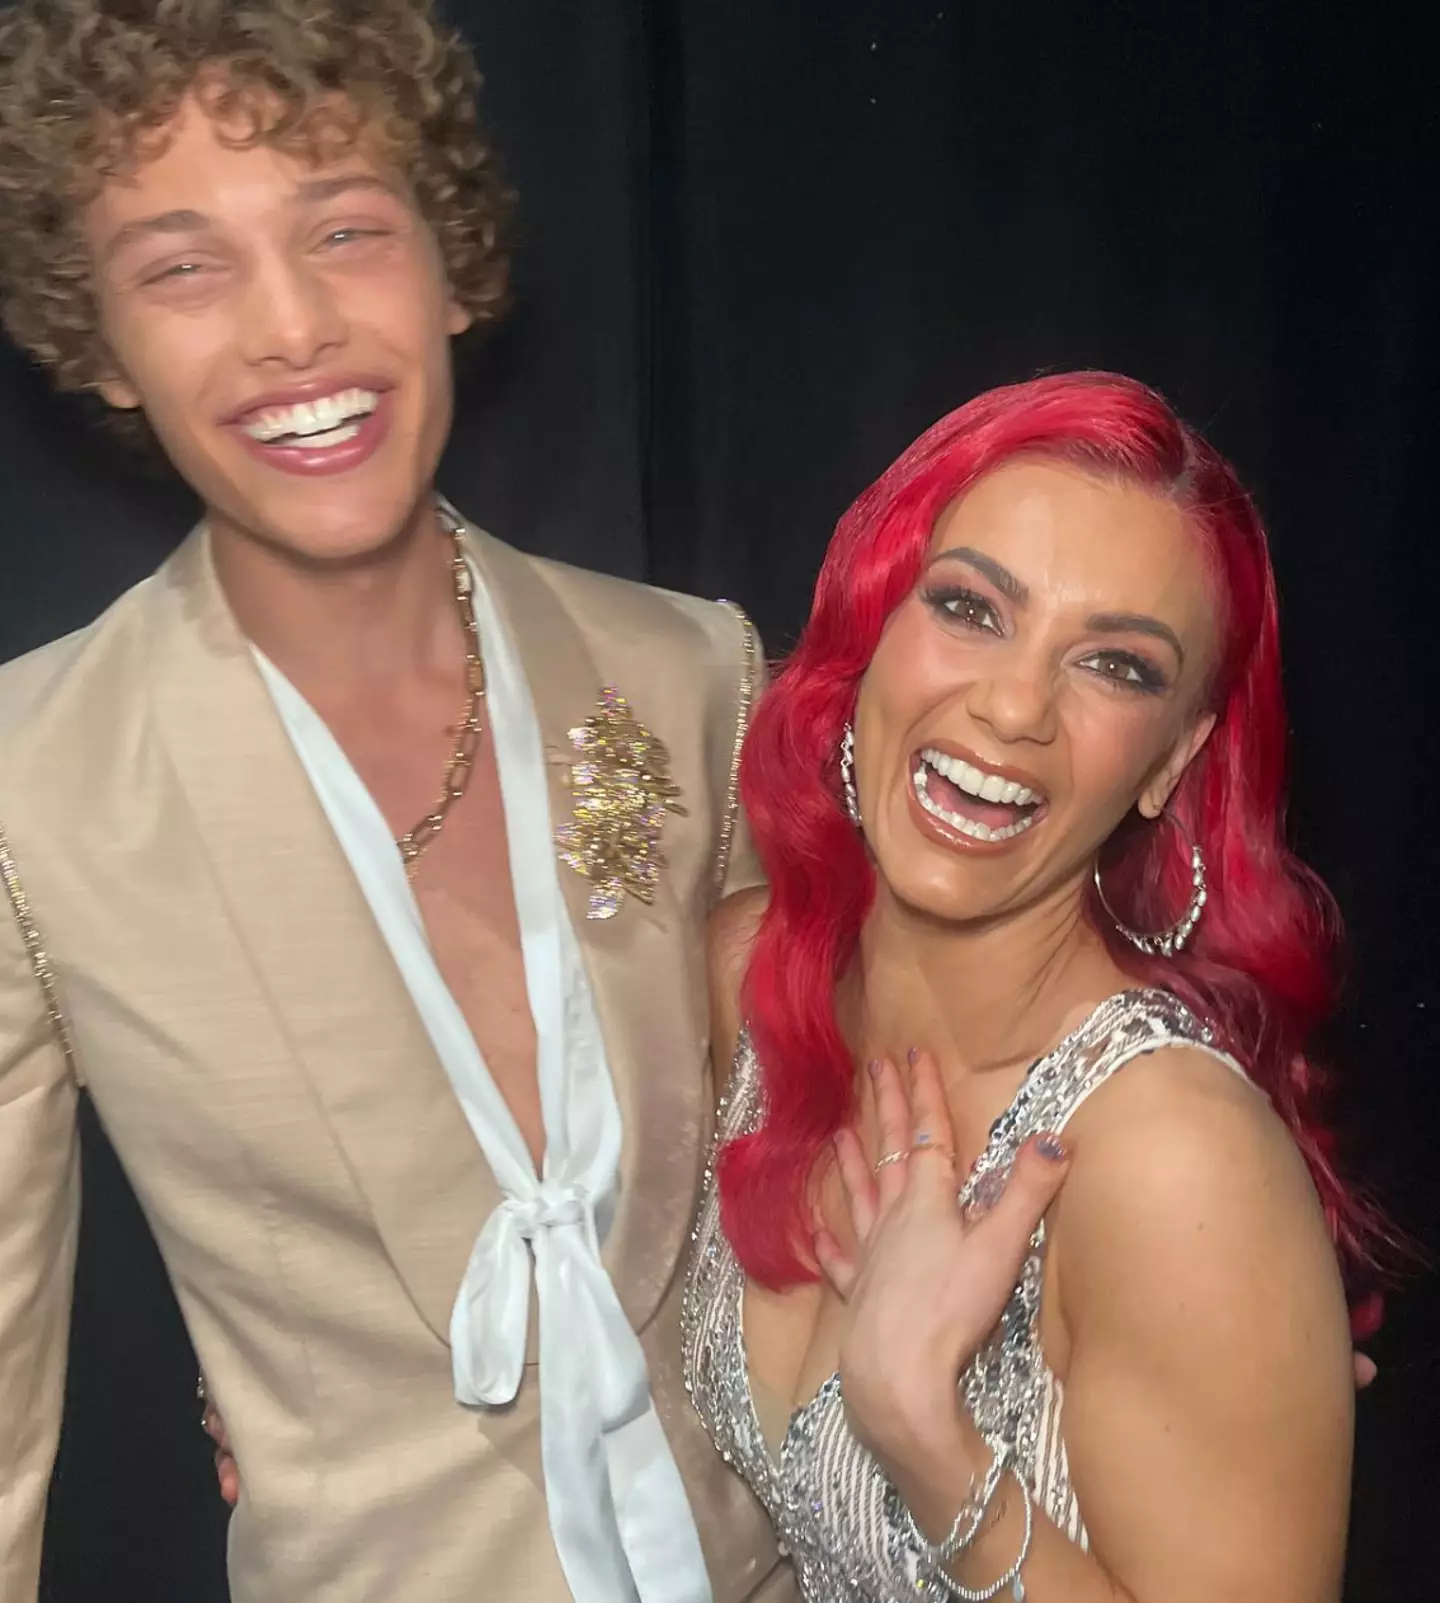 Bobby Brazier was paired with Dianne Buswell.